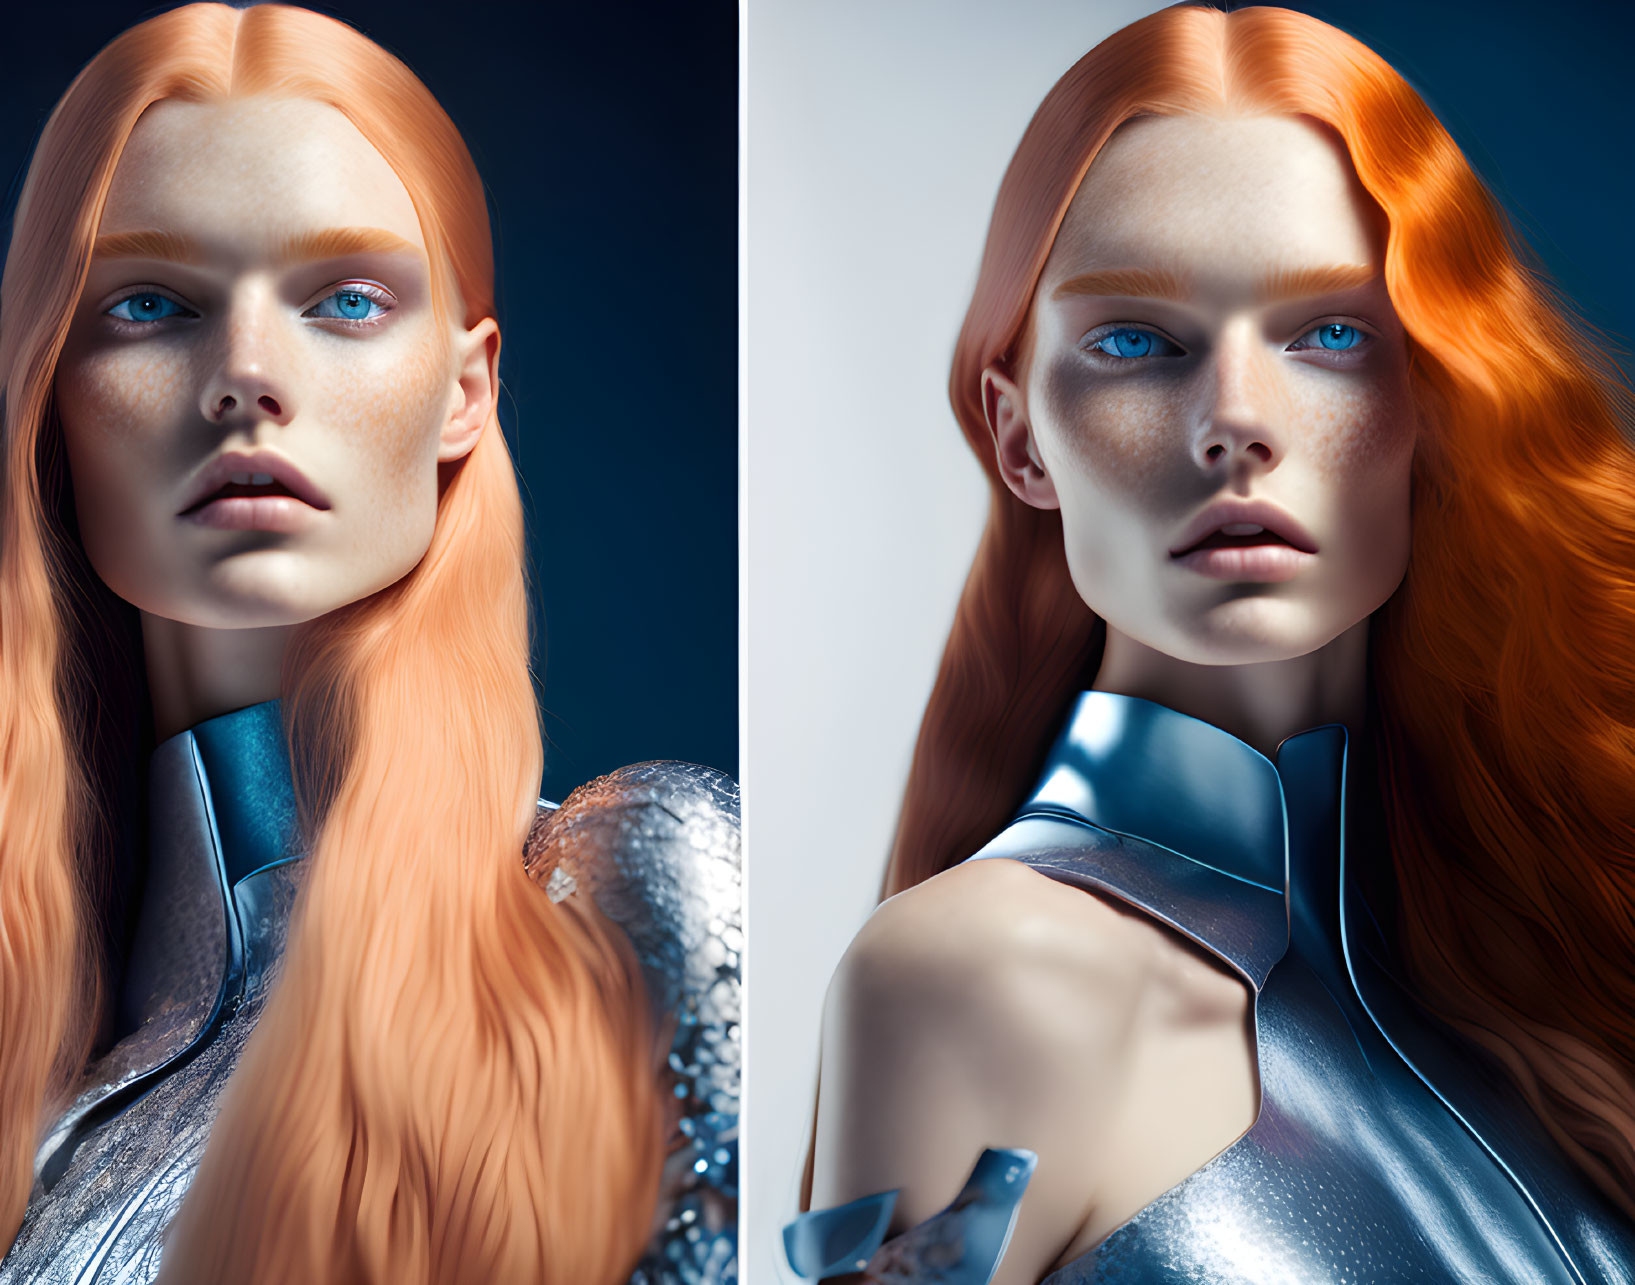 Diptych of Woman with Red Hair in Futuristic Metallic Clothing